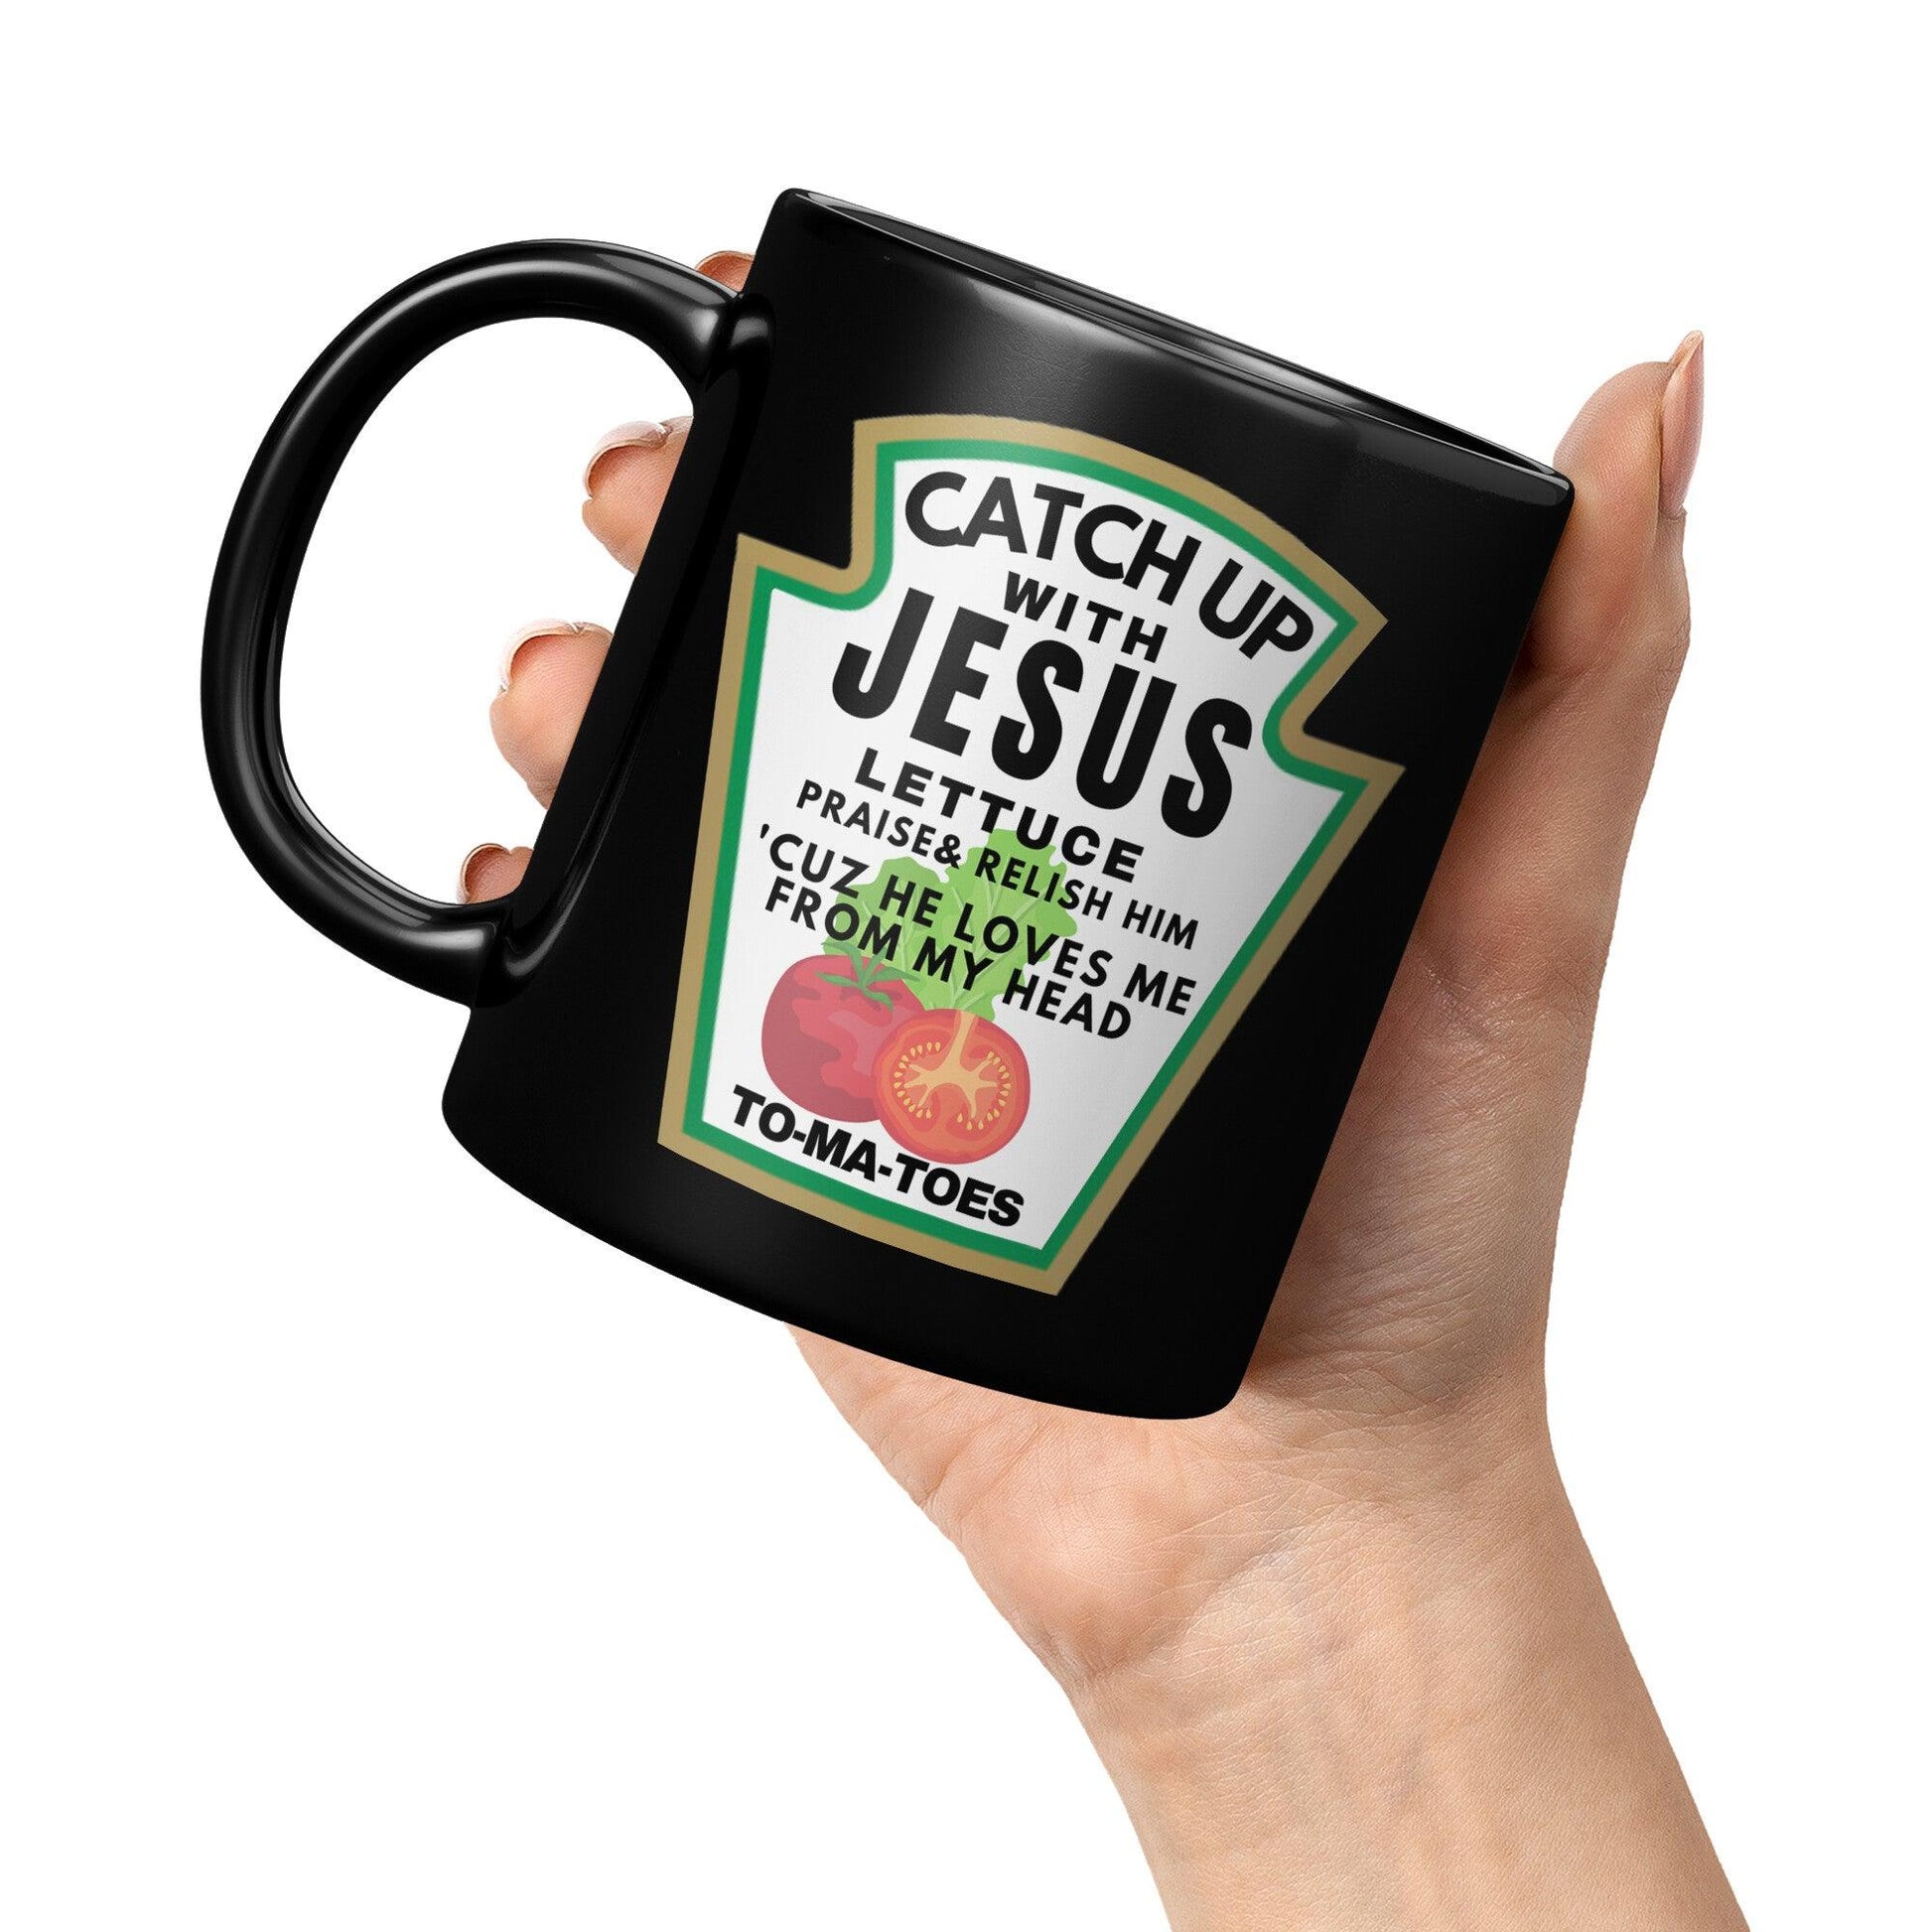 Catch Up with Jesus Lettuce Praise & Relish Him 'Cuz He Loves Me From My Head To-ma-toes Black Mug - TheGivenGet